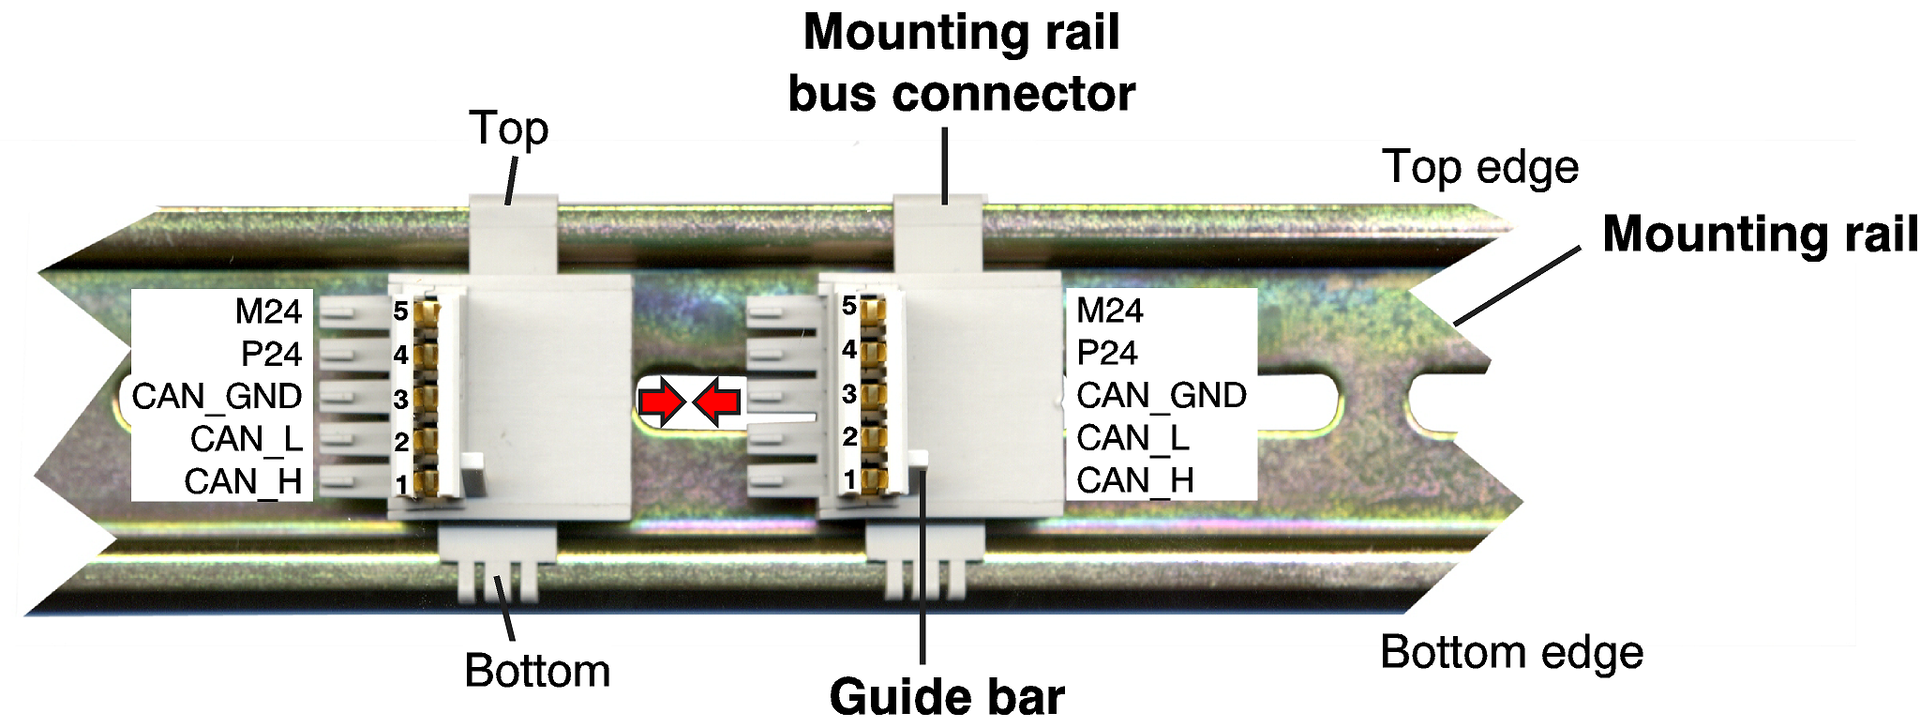 Image: Mounting rail with 2 bus connectors